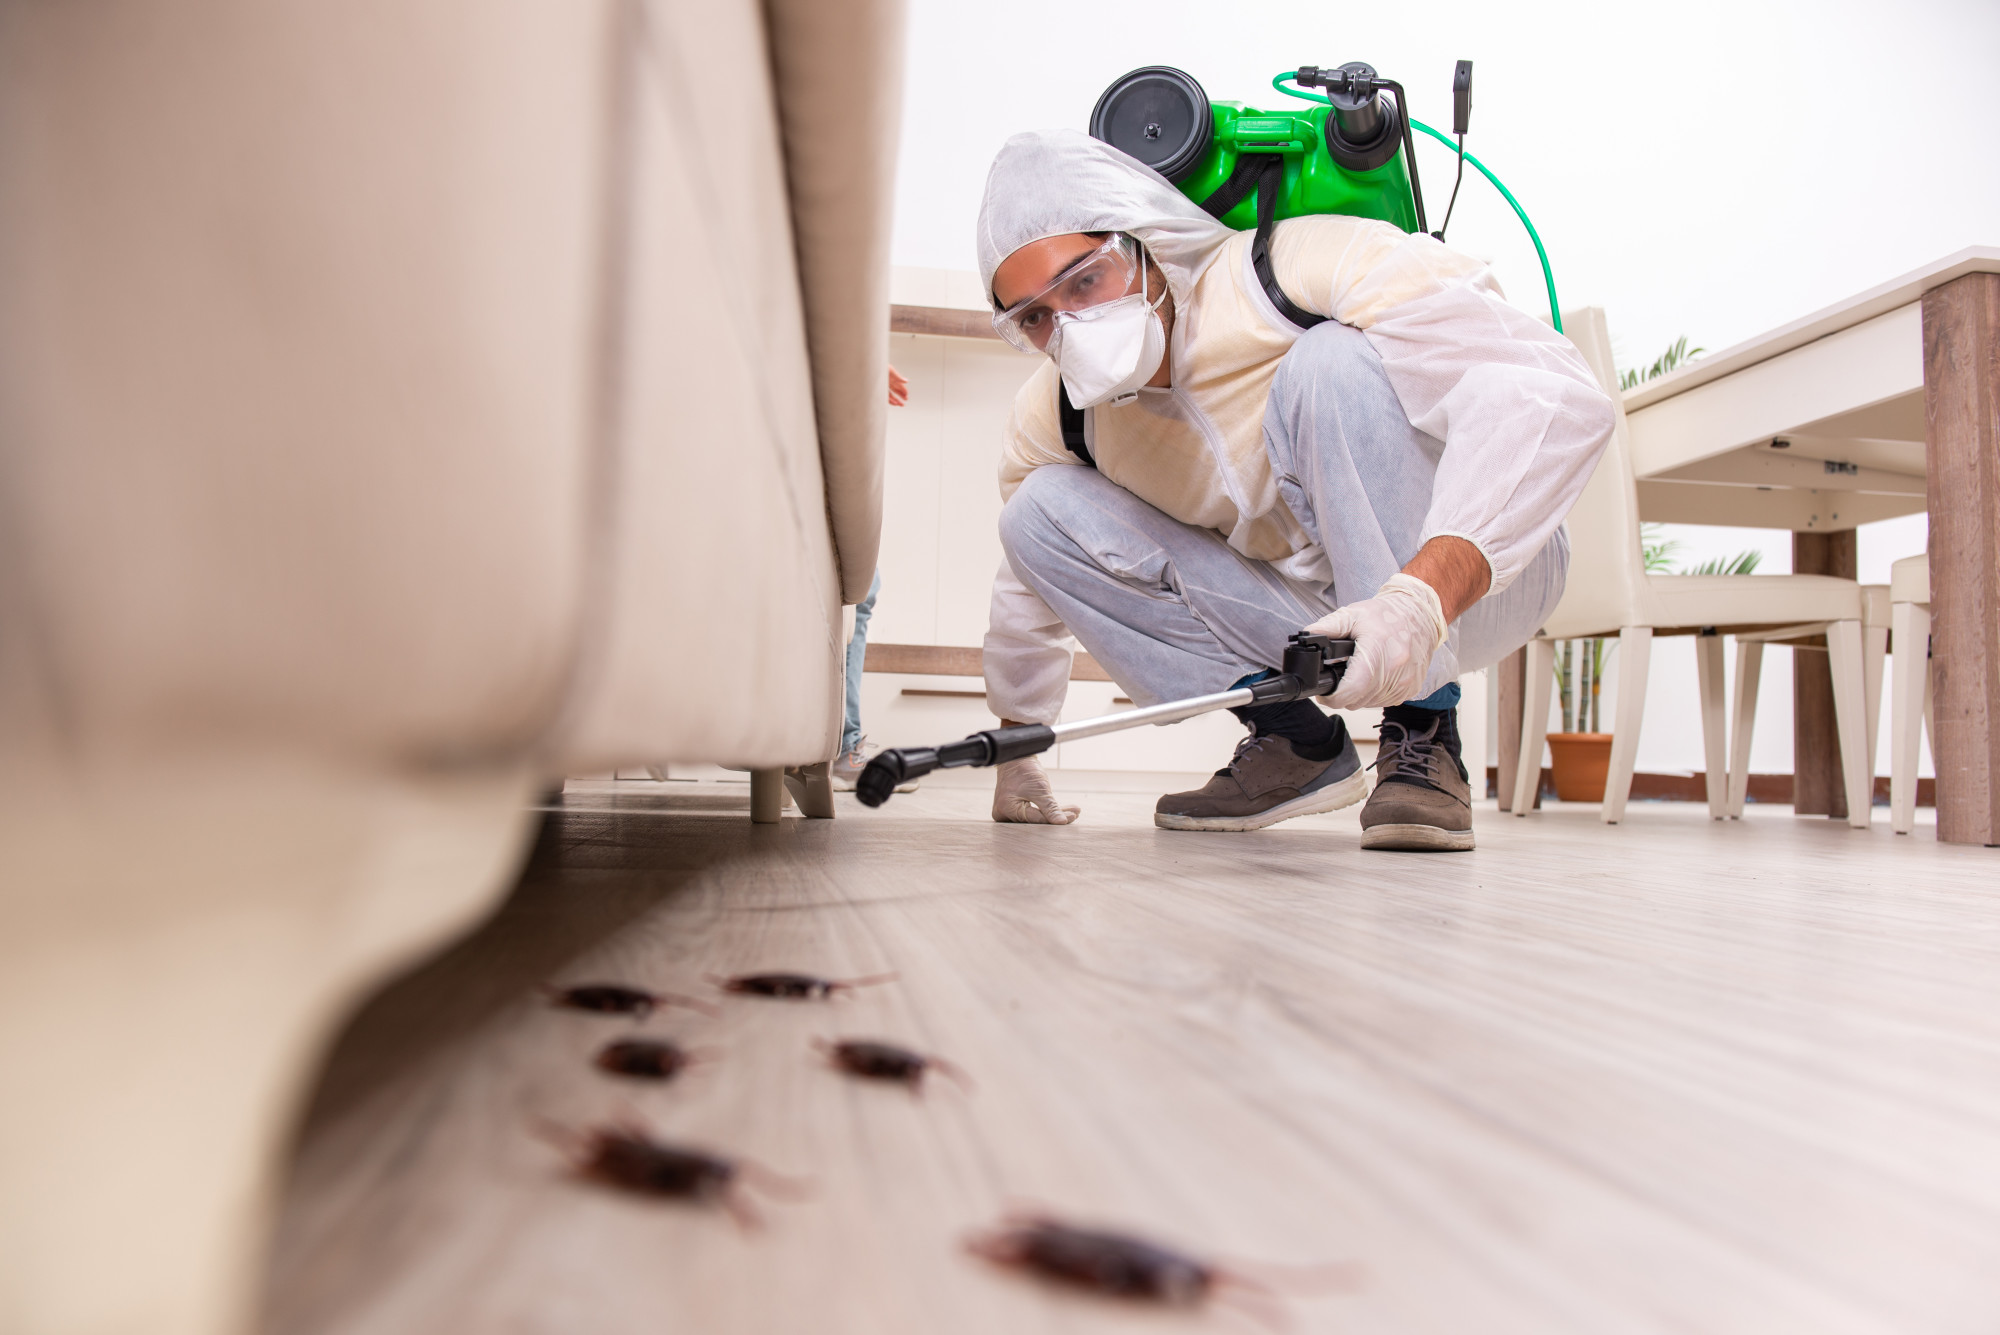 There are several types of household pests that can invade your property. Learn more about preventing and getting rid of these pests here.